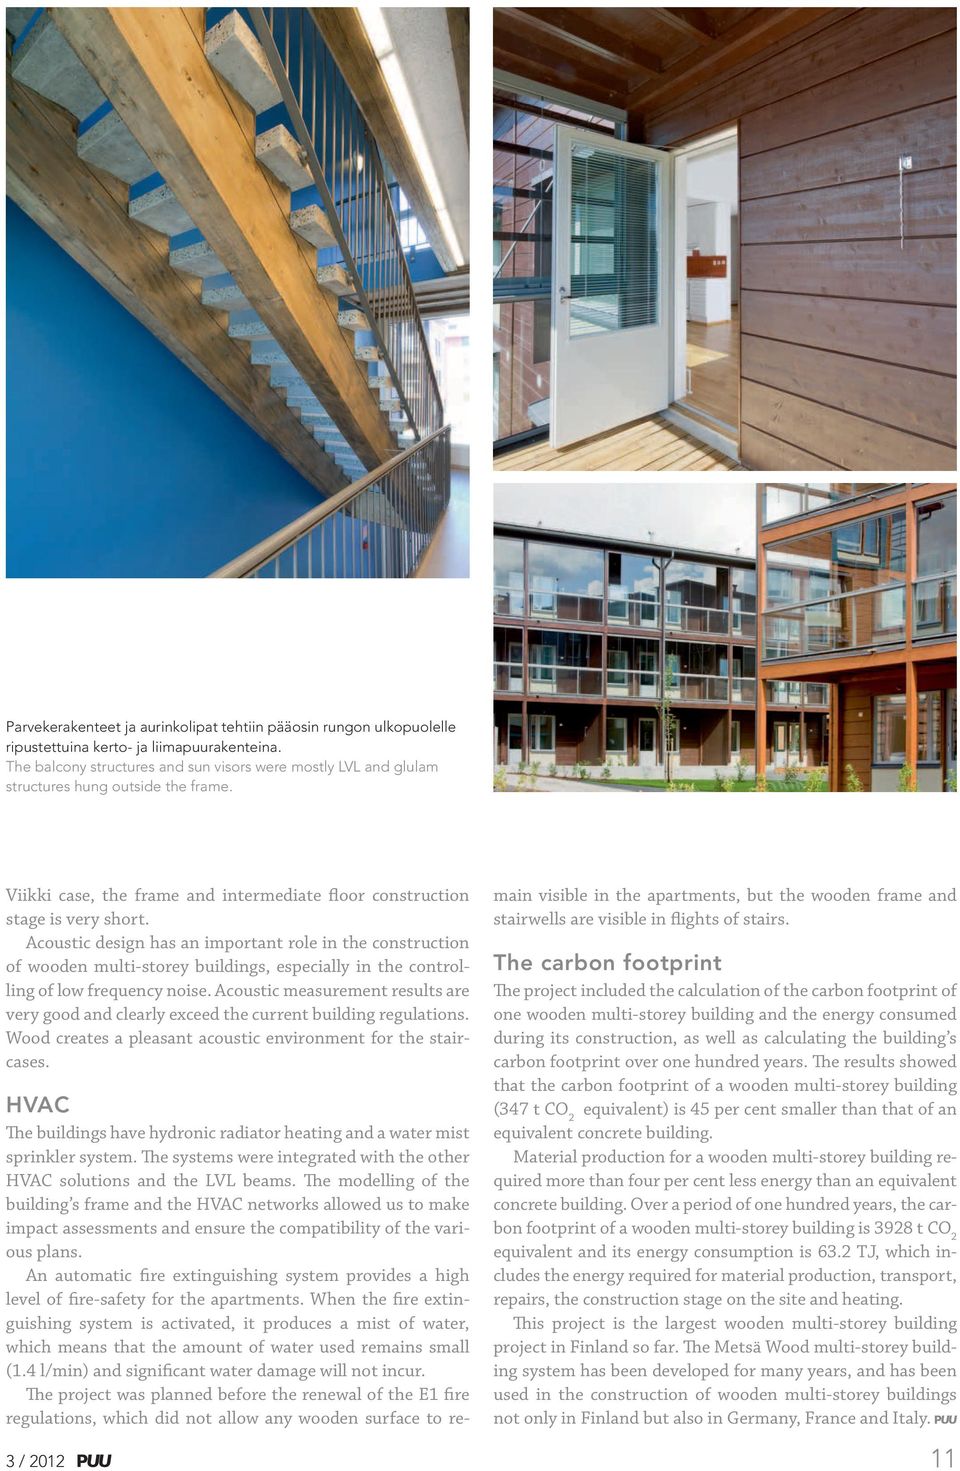 Acoustic design has an important role in the construction of wooden multi-storey buildings, especially in the controlling of low frequency noise.